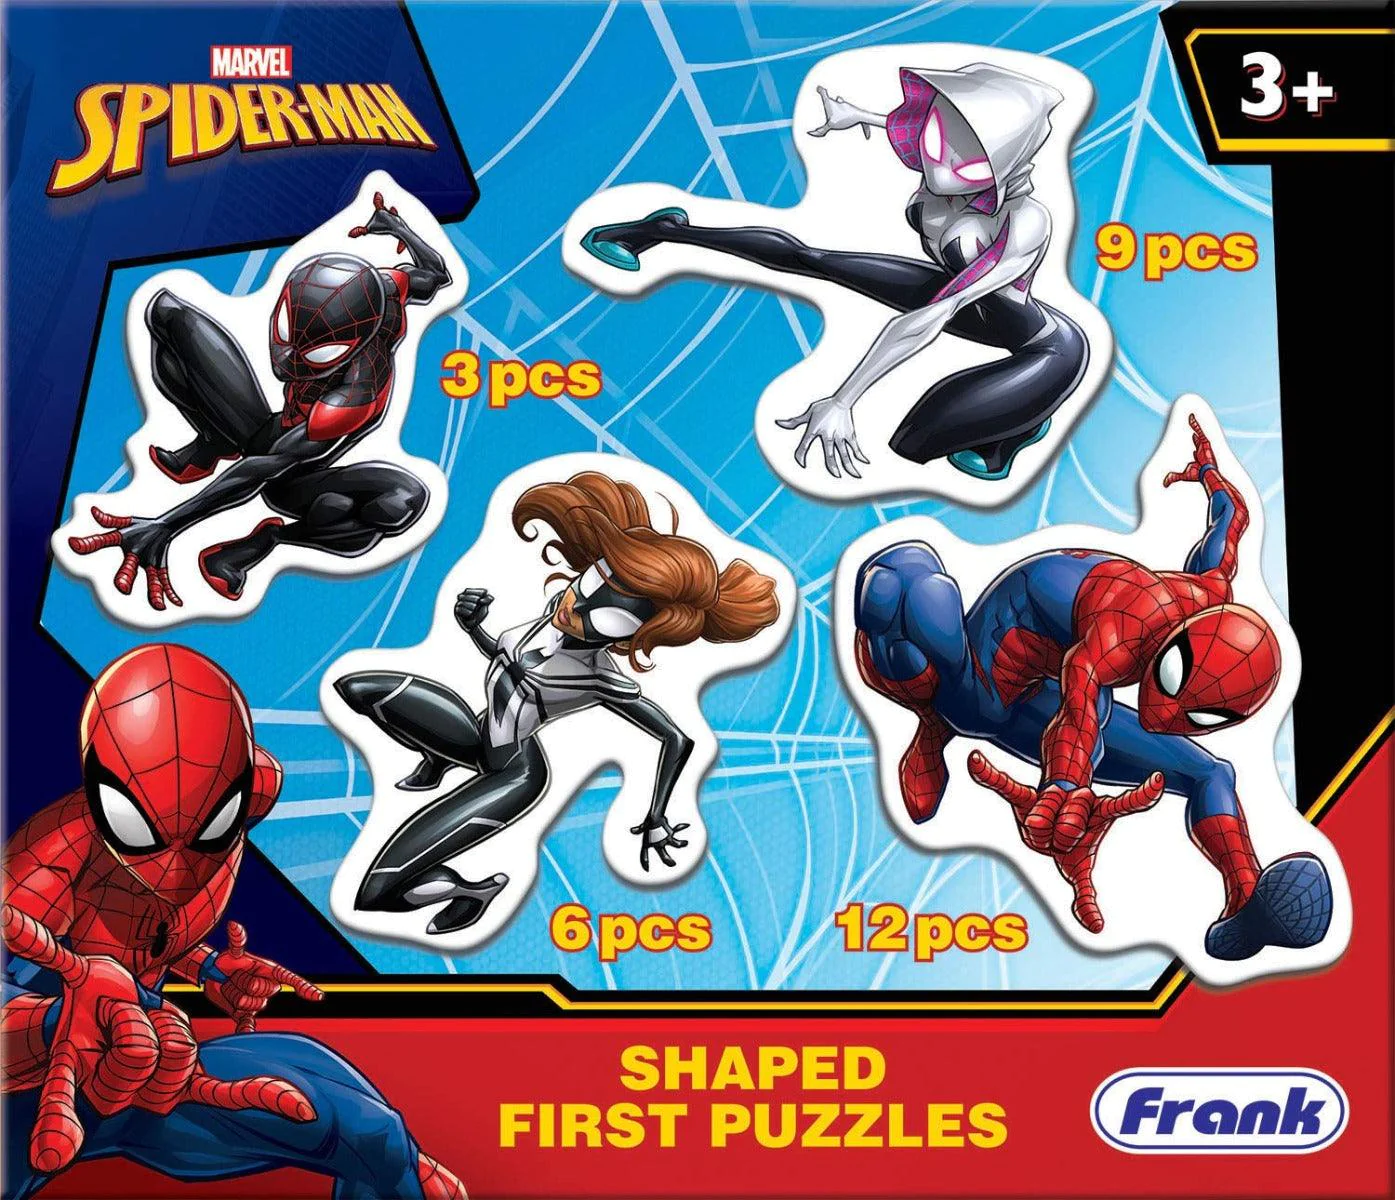 Frank Marvel Spider-Man Puzzle - 60 Piece Jigsaw Puzzle For Kids